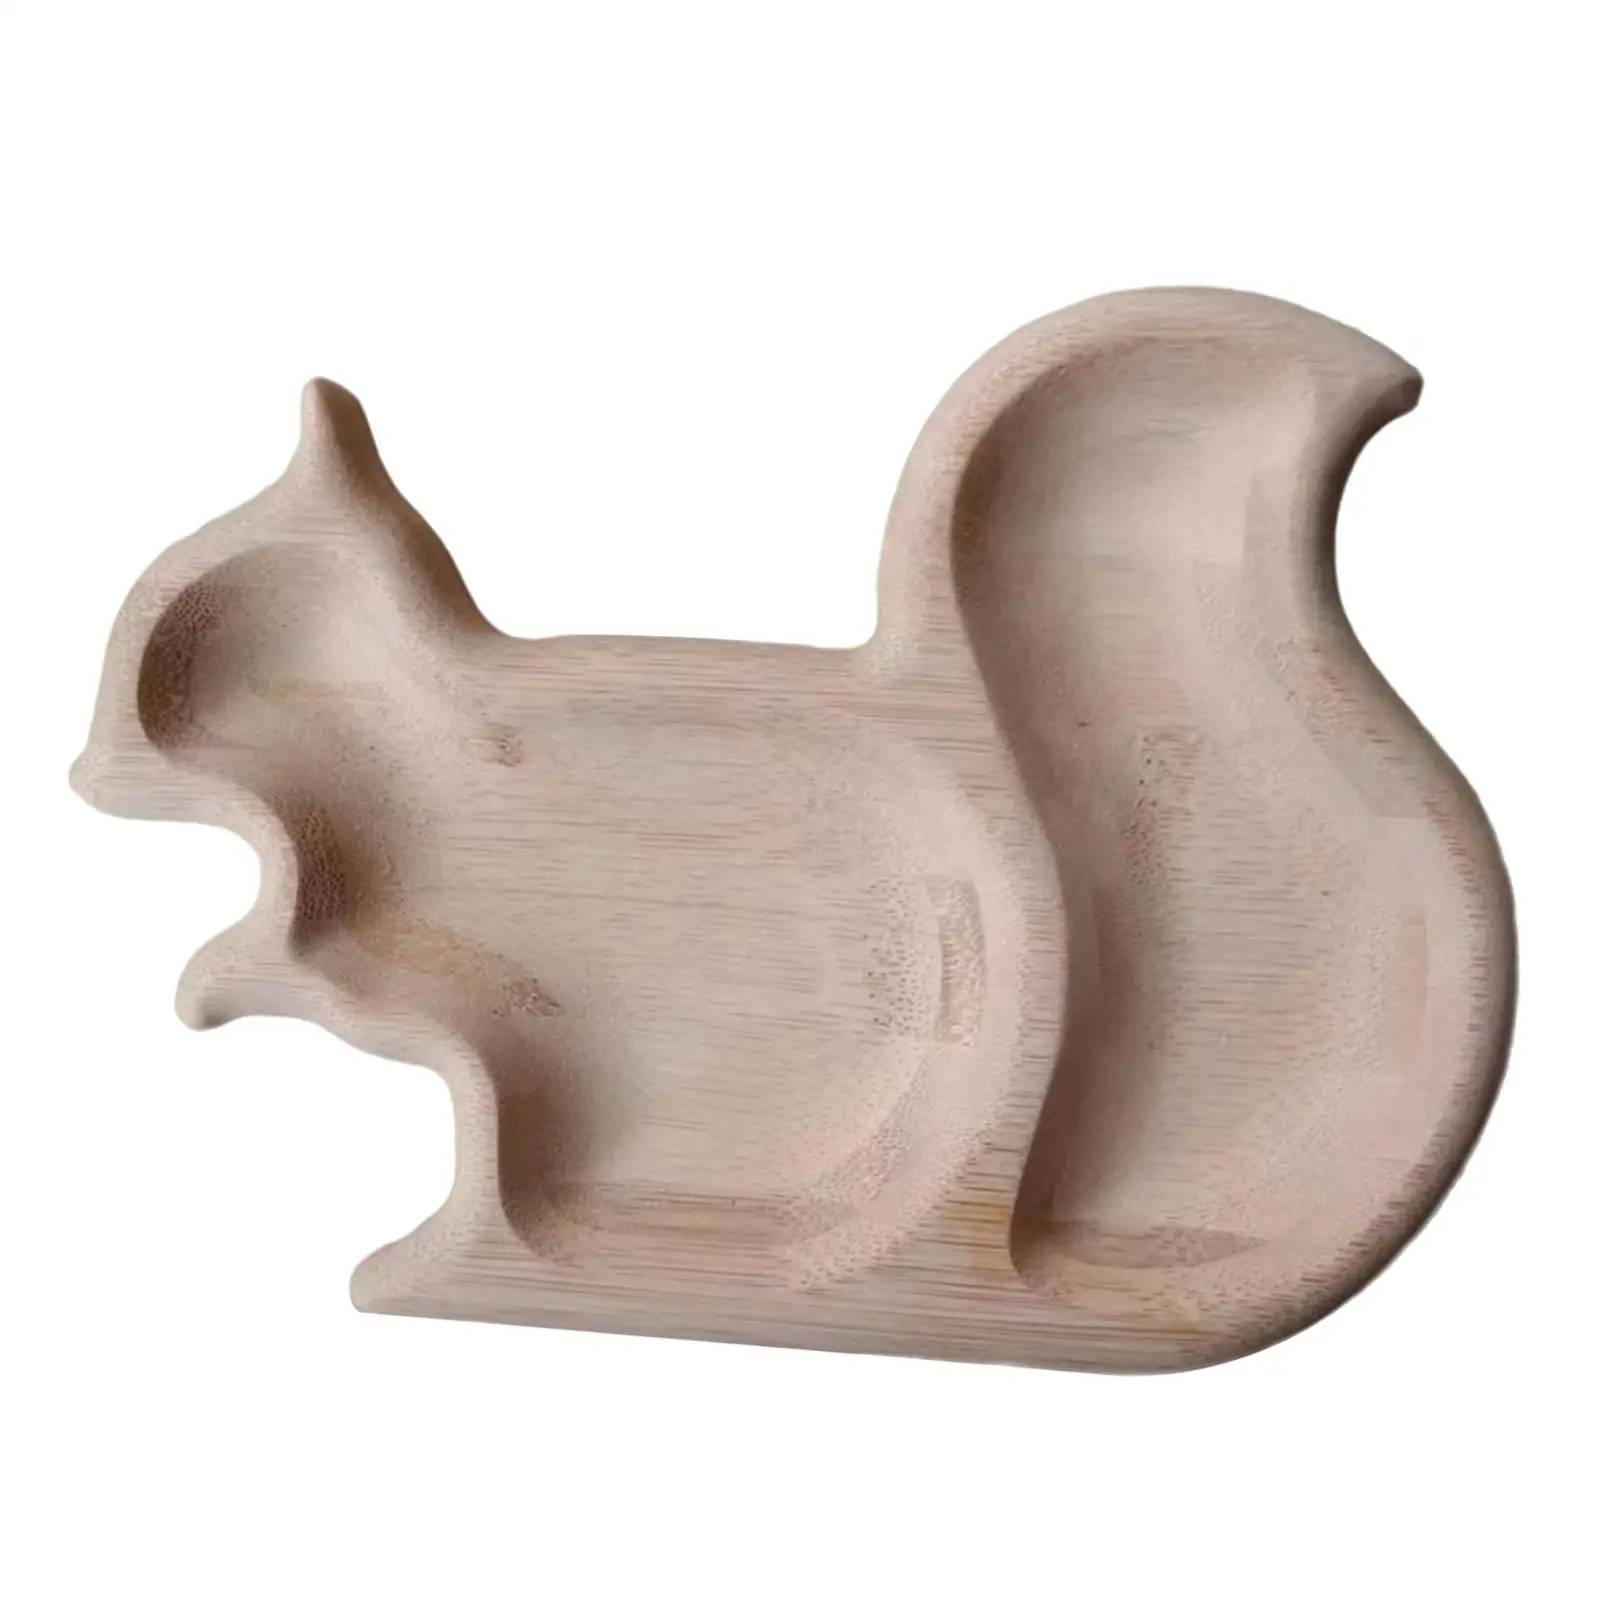 Squirrel Serving Dish Dessert Platter Tray Candy Dish Nut Bowl Wooden Serving Tray for Snack Goodies Fruit Candies Kitchen